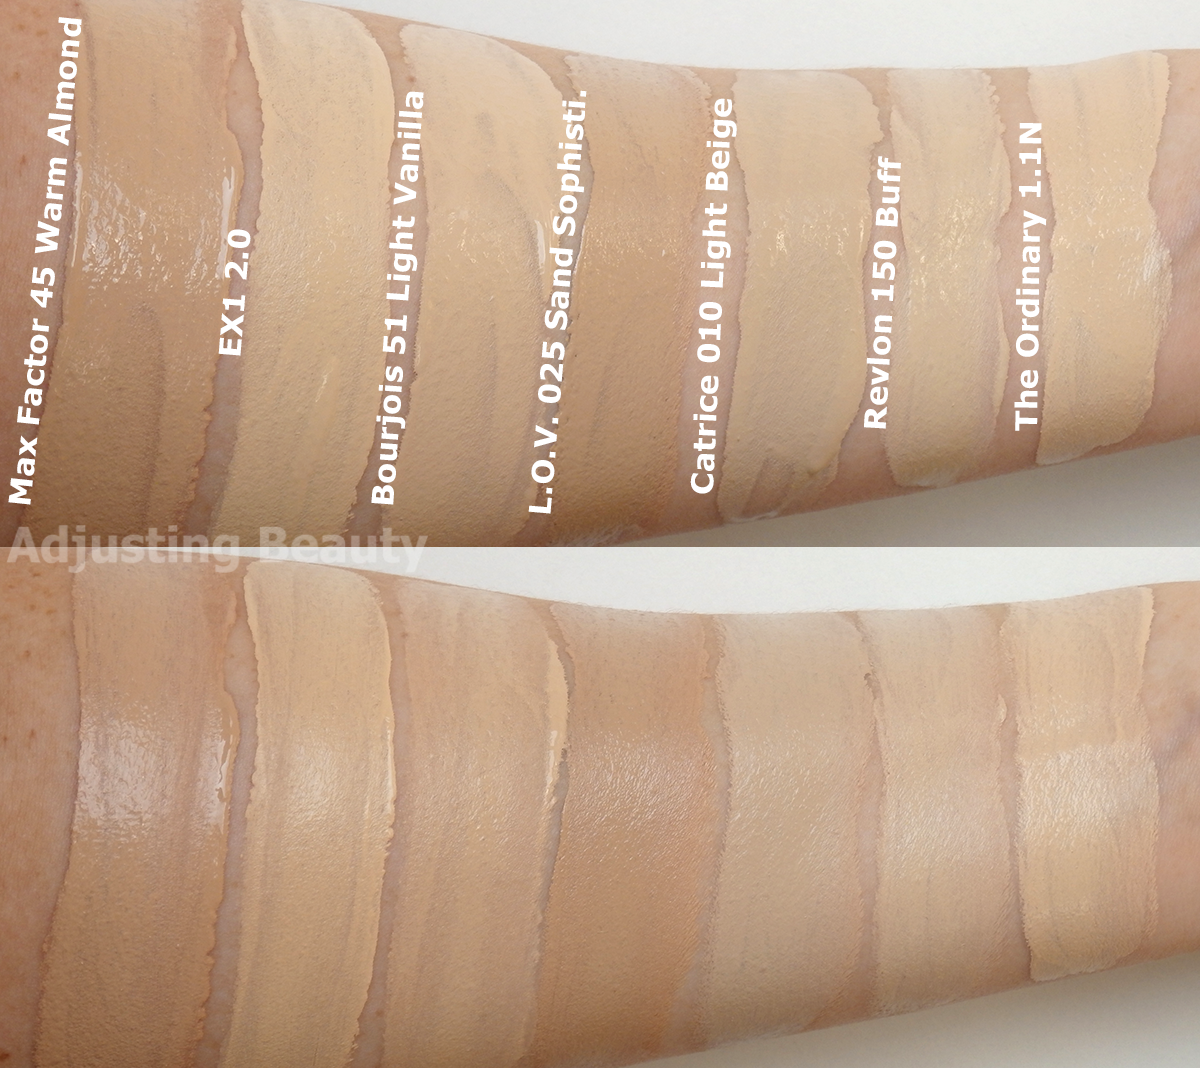 Max Factor Foundation Colour Chart